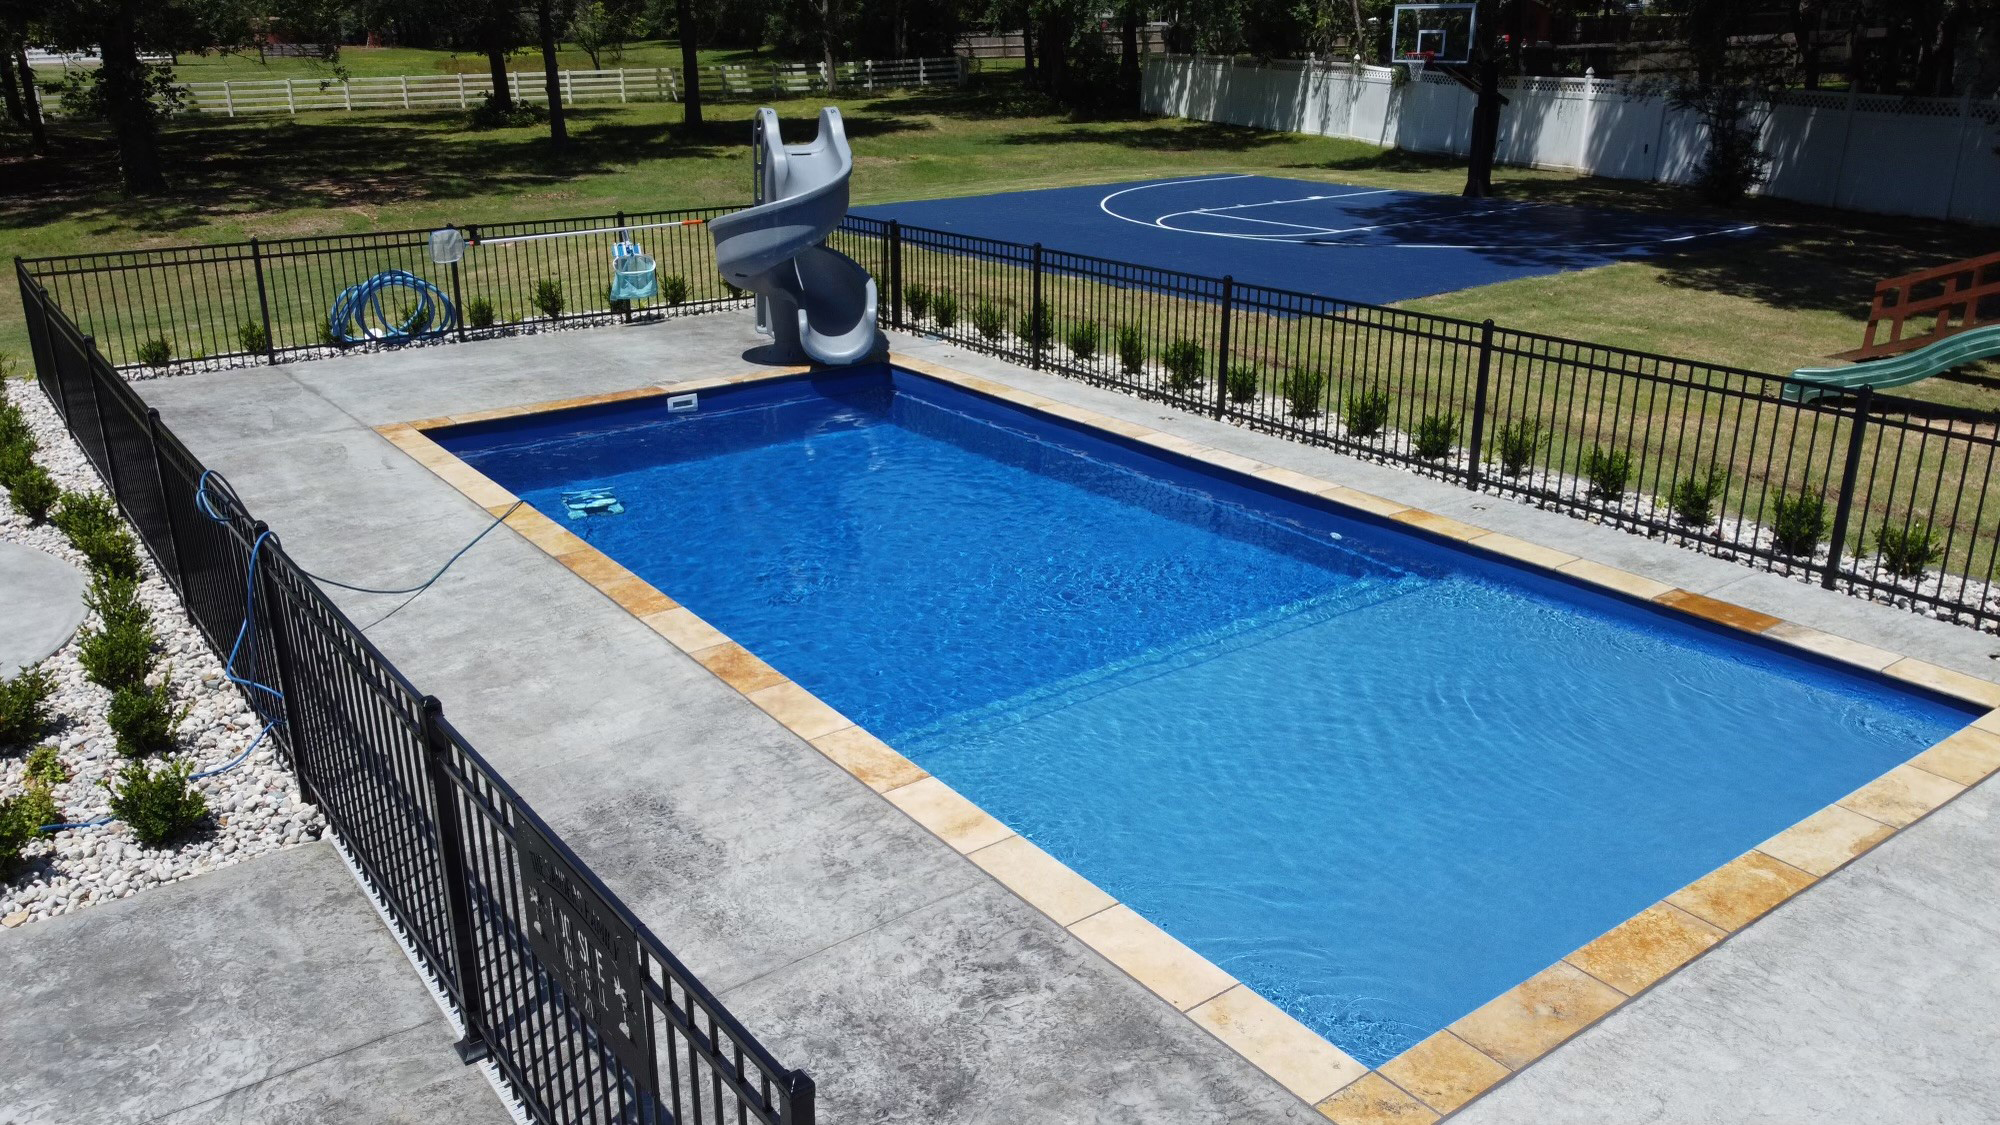 Longview Inground Fiberglass Pools Texas Vegas Style swimming pool is manufactured by Lonestar of New Braunfels for your private backyard oasis 32.515115091507035, -94.71616662663084